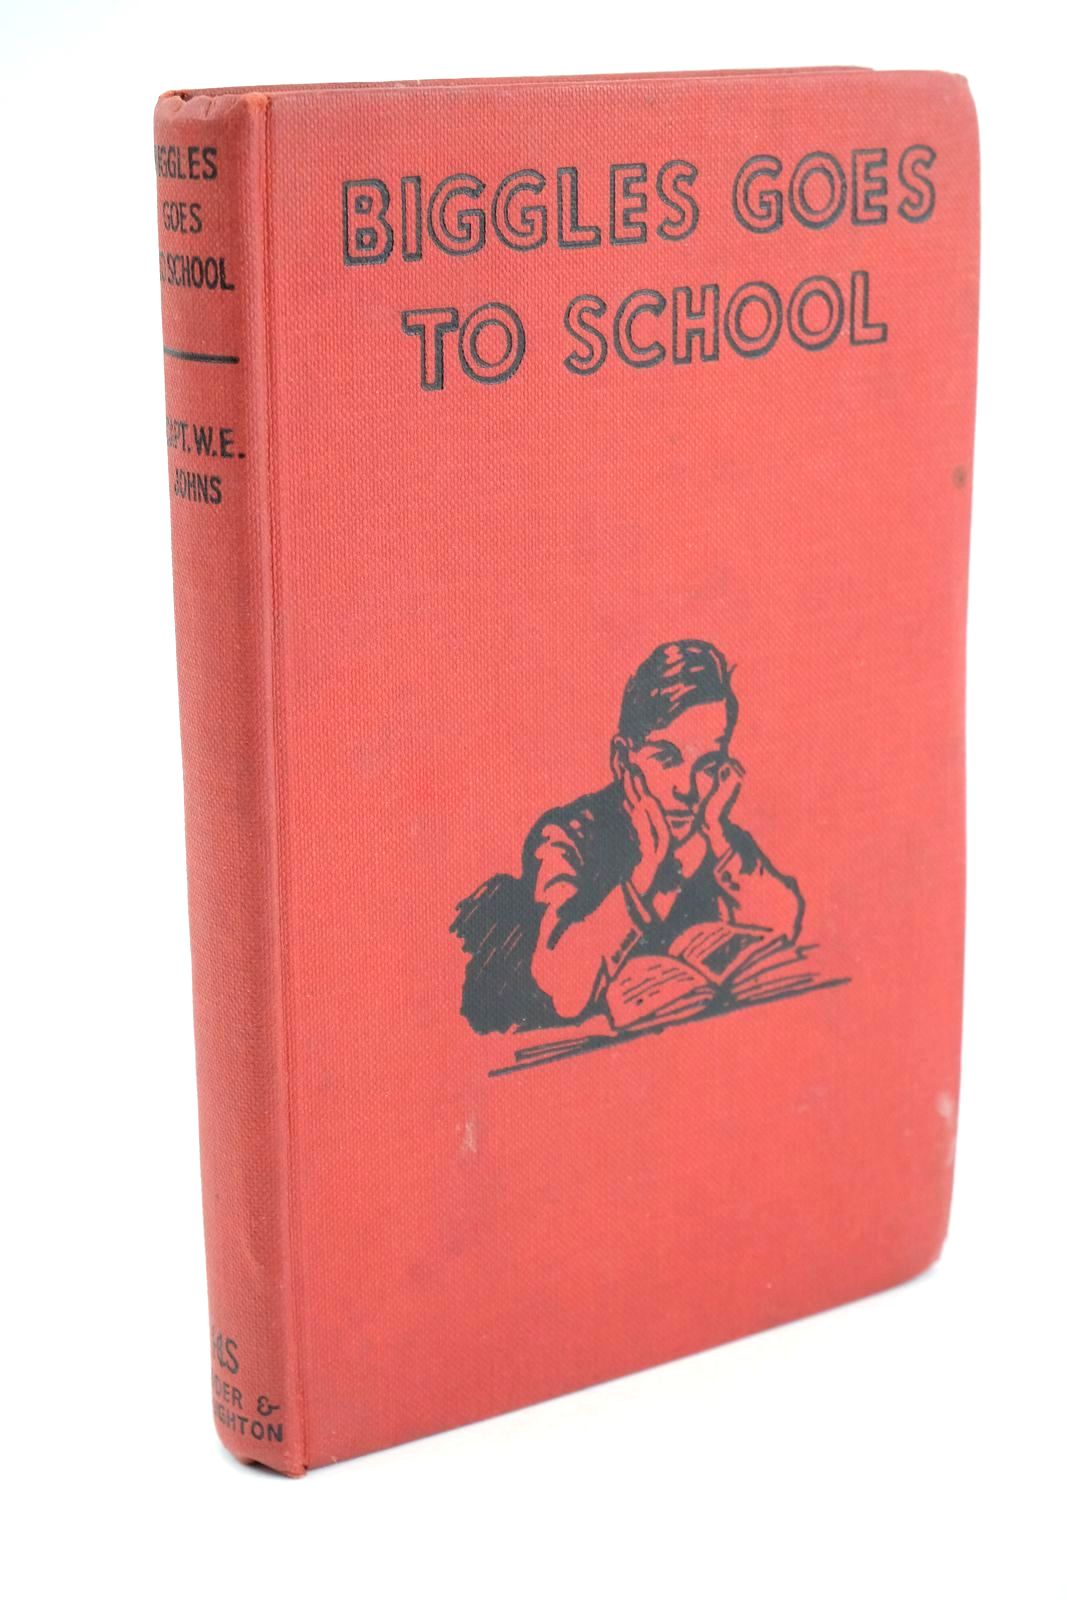 Photo of BIGGLES GOES TO SCHOOL written by Johns, W.E. illustrated by Stead,  published by Hodder & Stoughton (STOCK CODE: 1324855)  for sale by Stella & Rose's Books